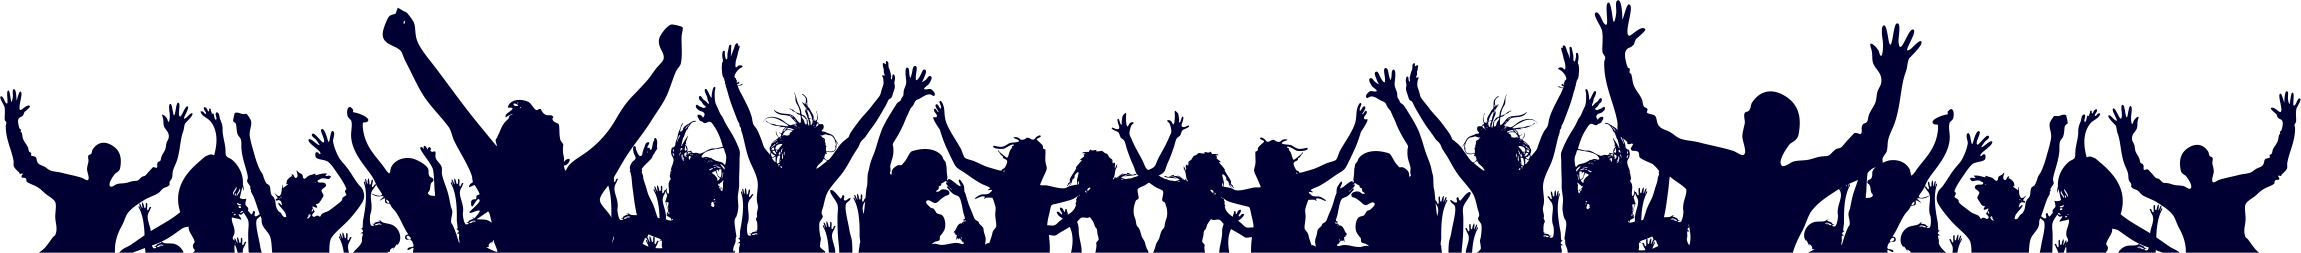 Party People Silhouette